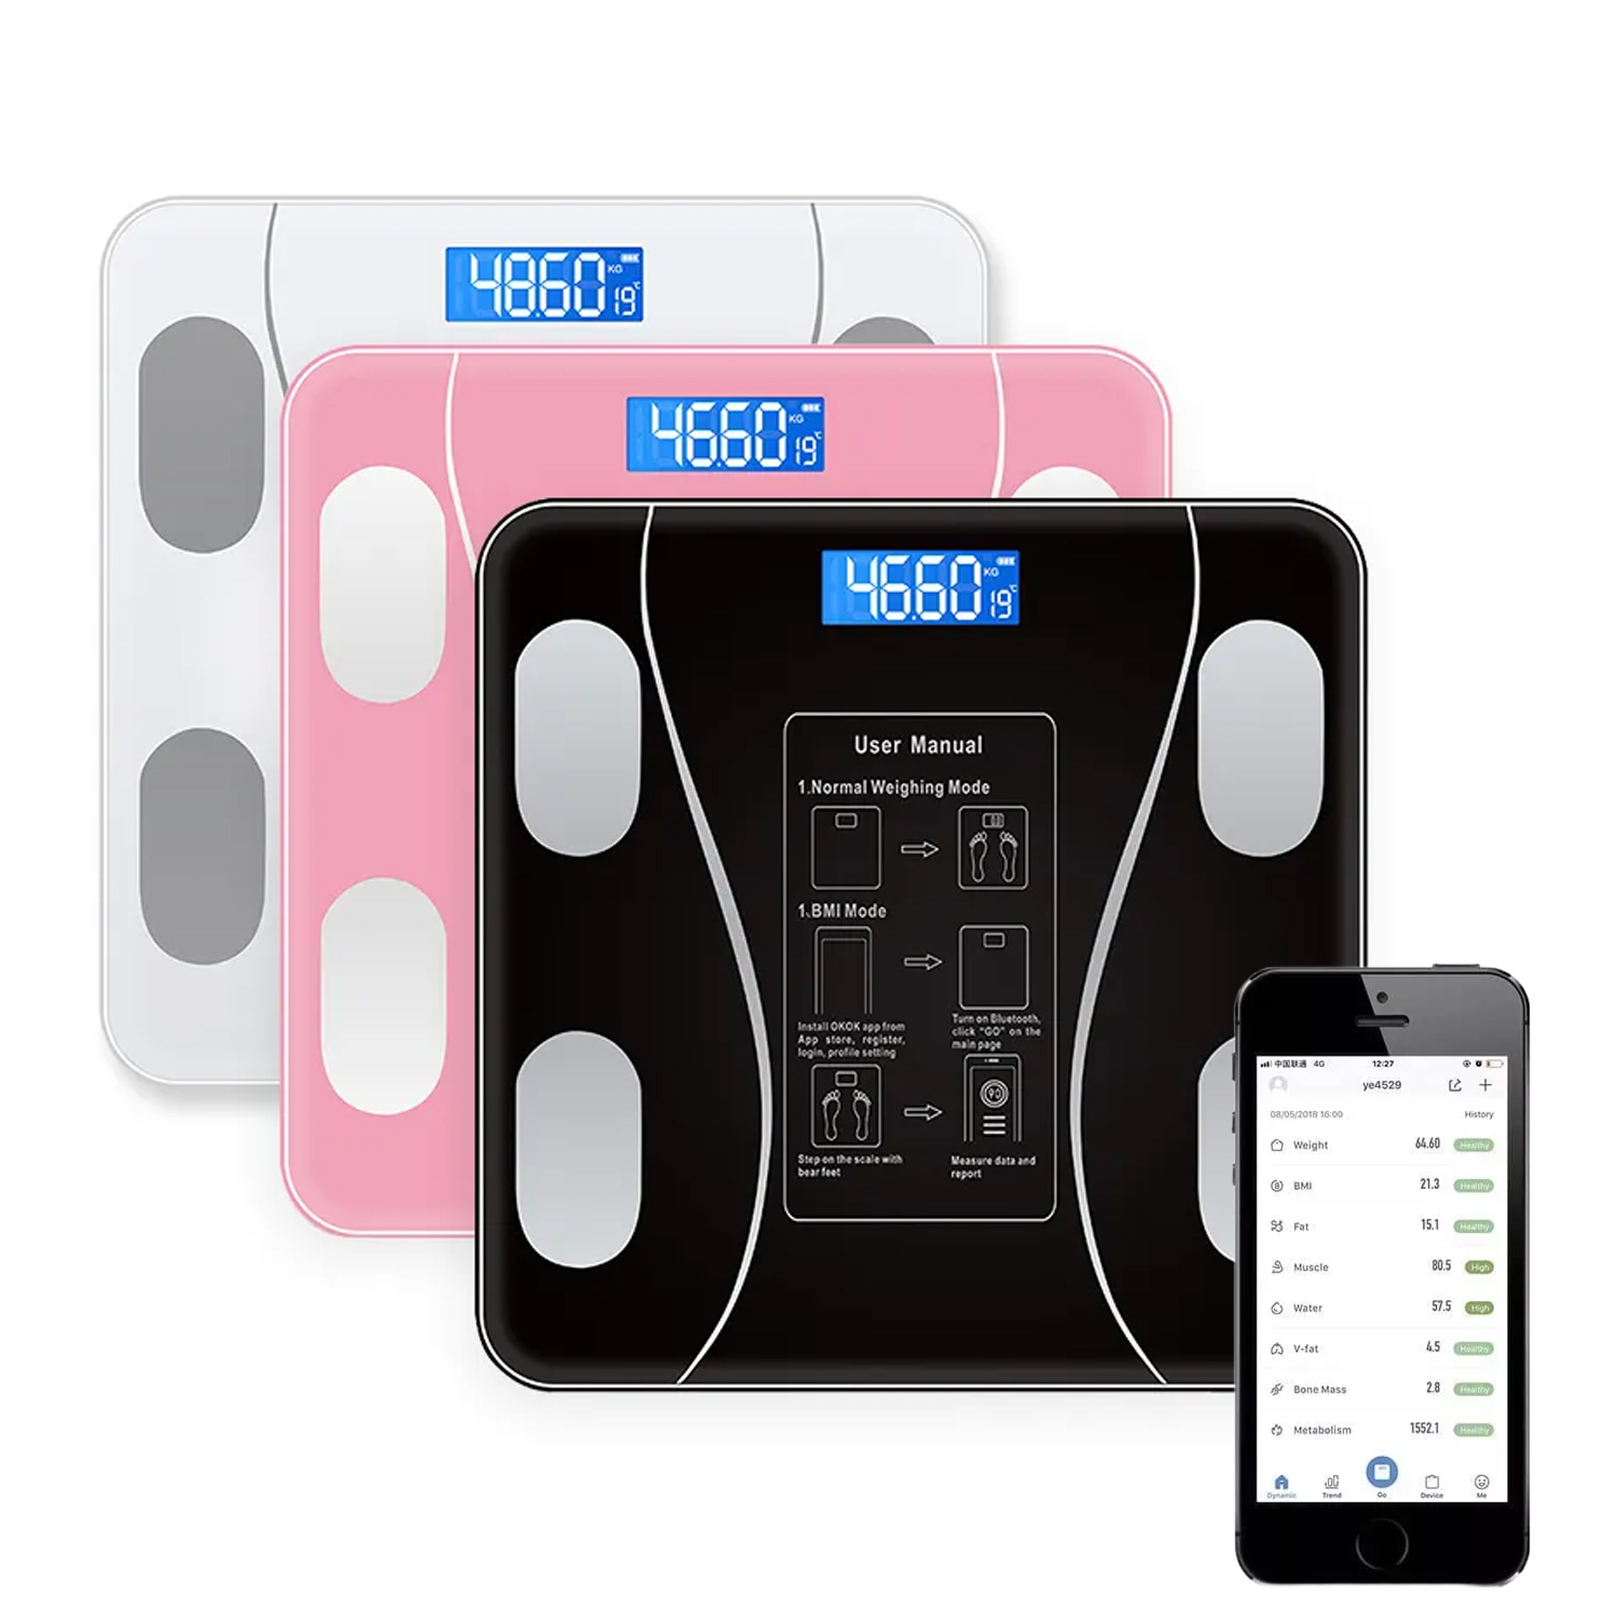 RENPHO Bluetooth Food Scale with App, Digital Smart Kitchen Scale, Glass,  White 